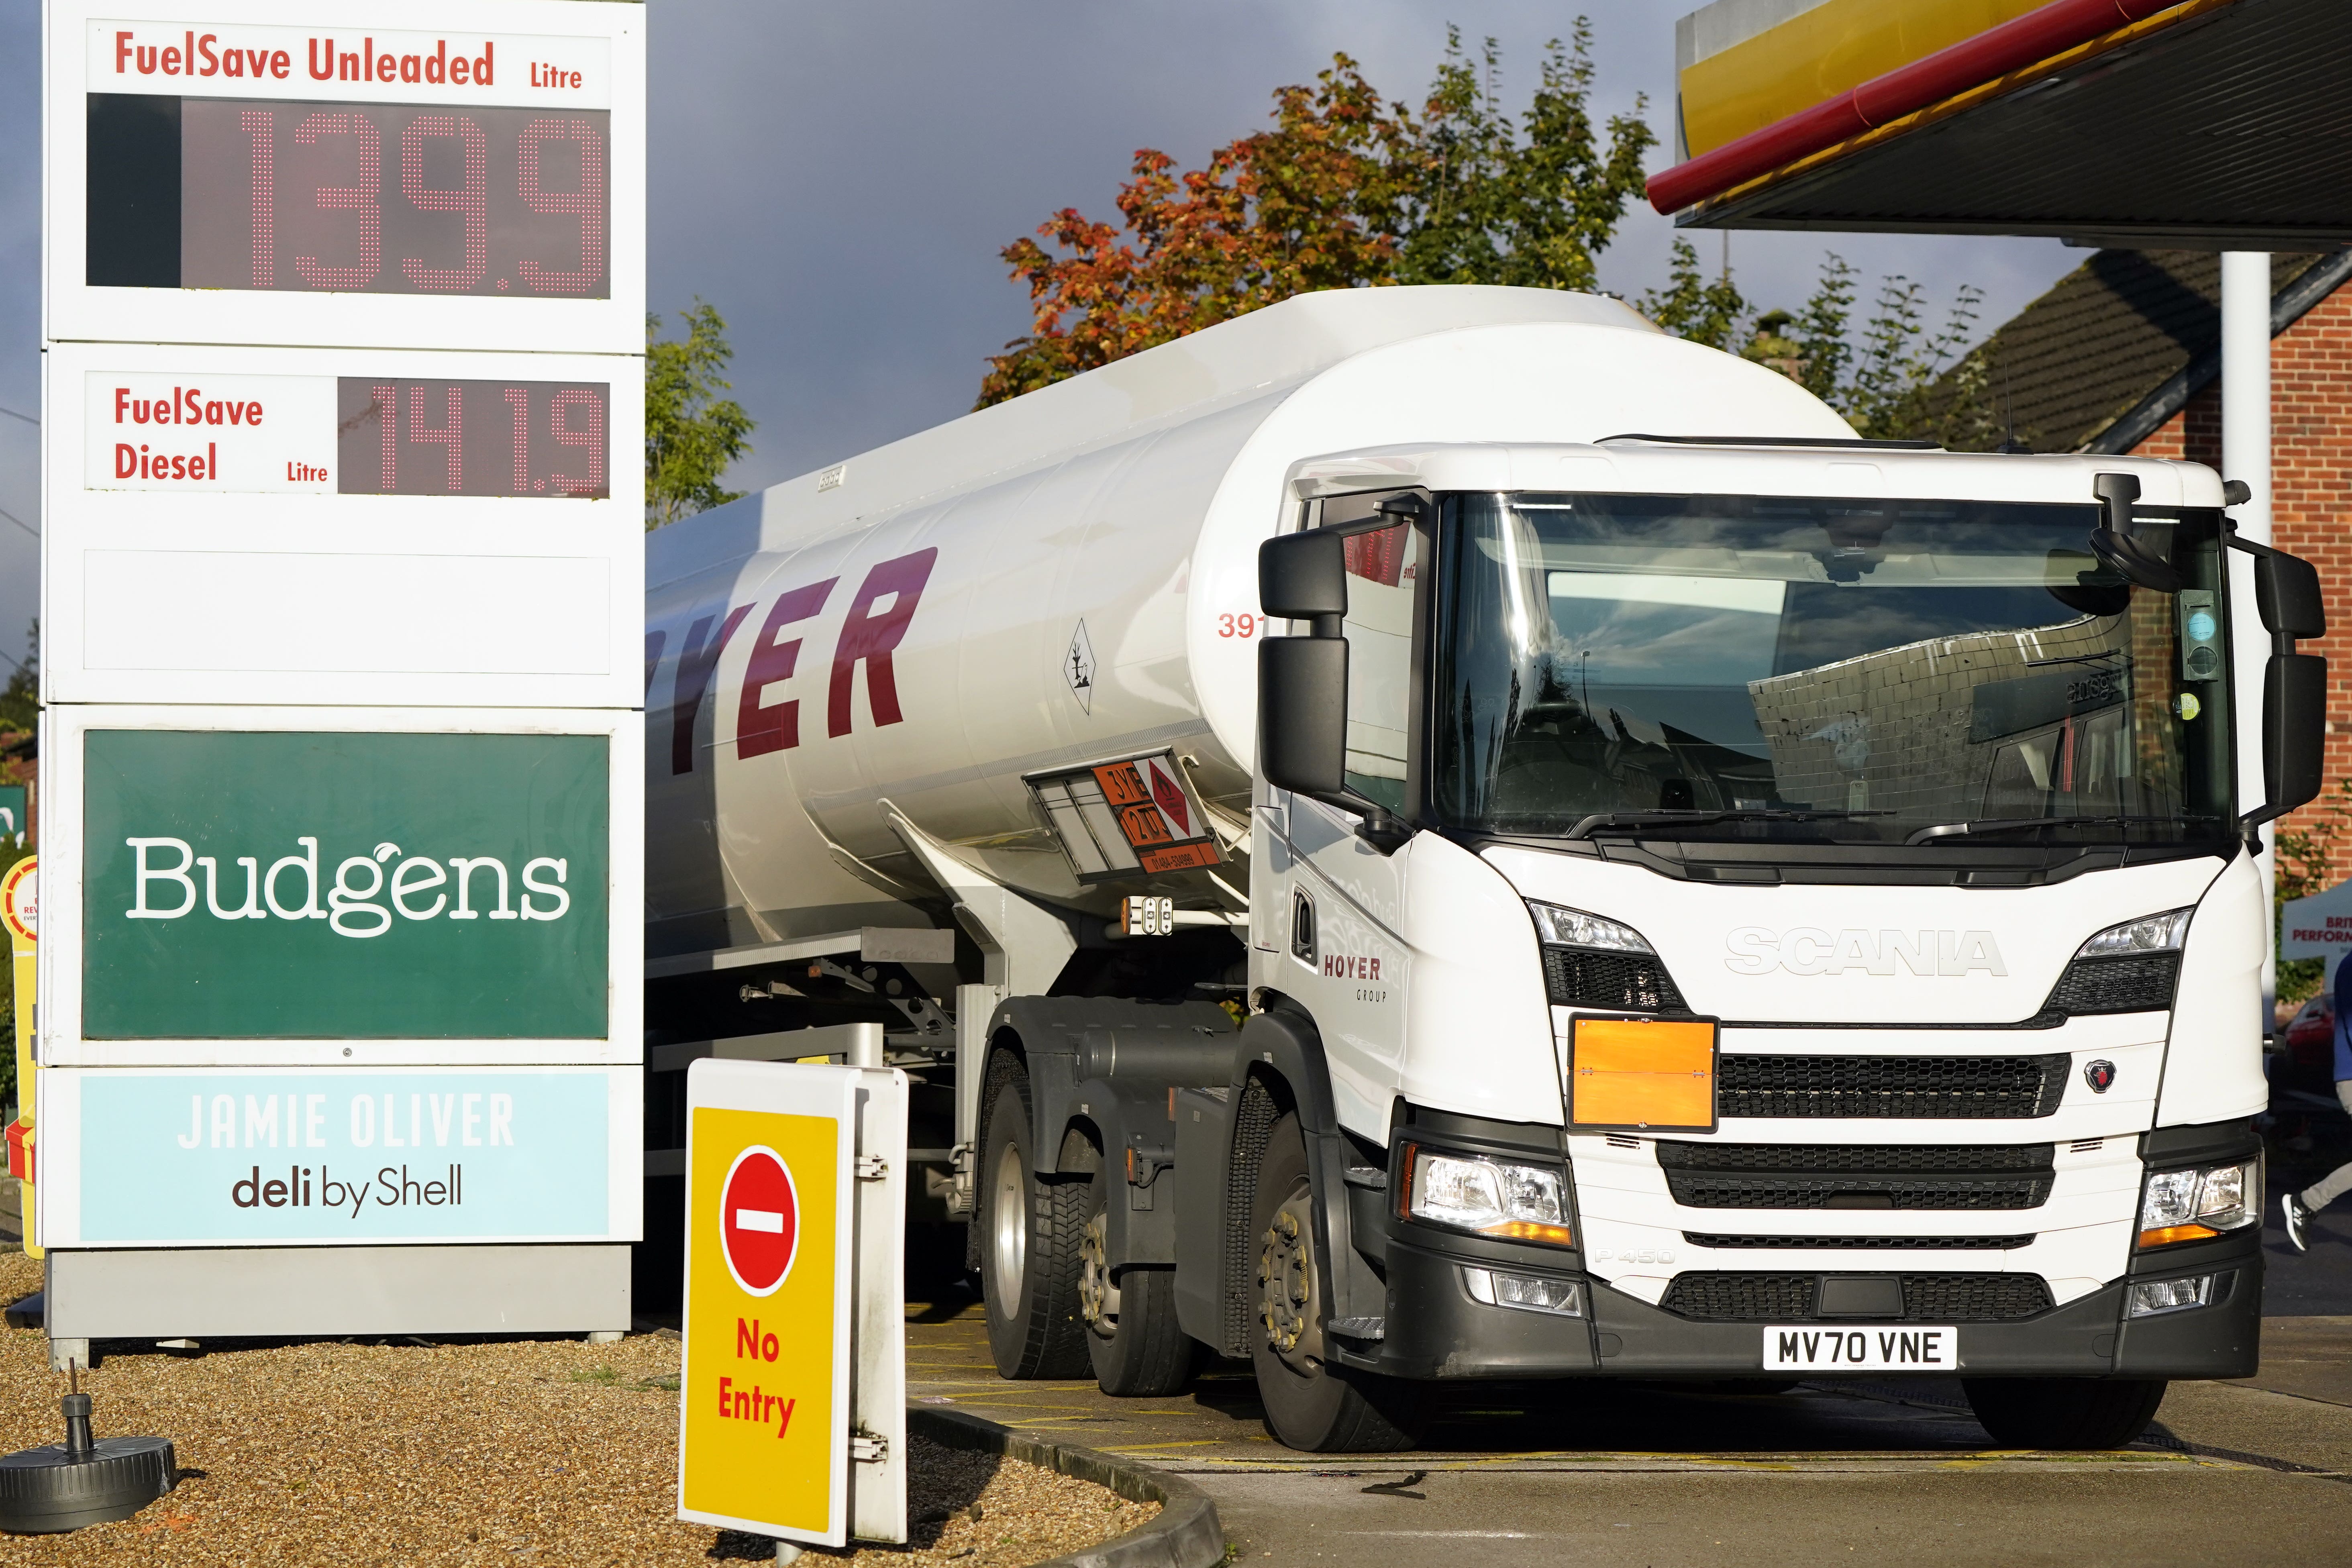 UK fuel tankers will be permitted to carry more petrol and diesel during disruption to supplies under Government proposals (Andrew Matthews/PA)